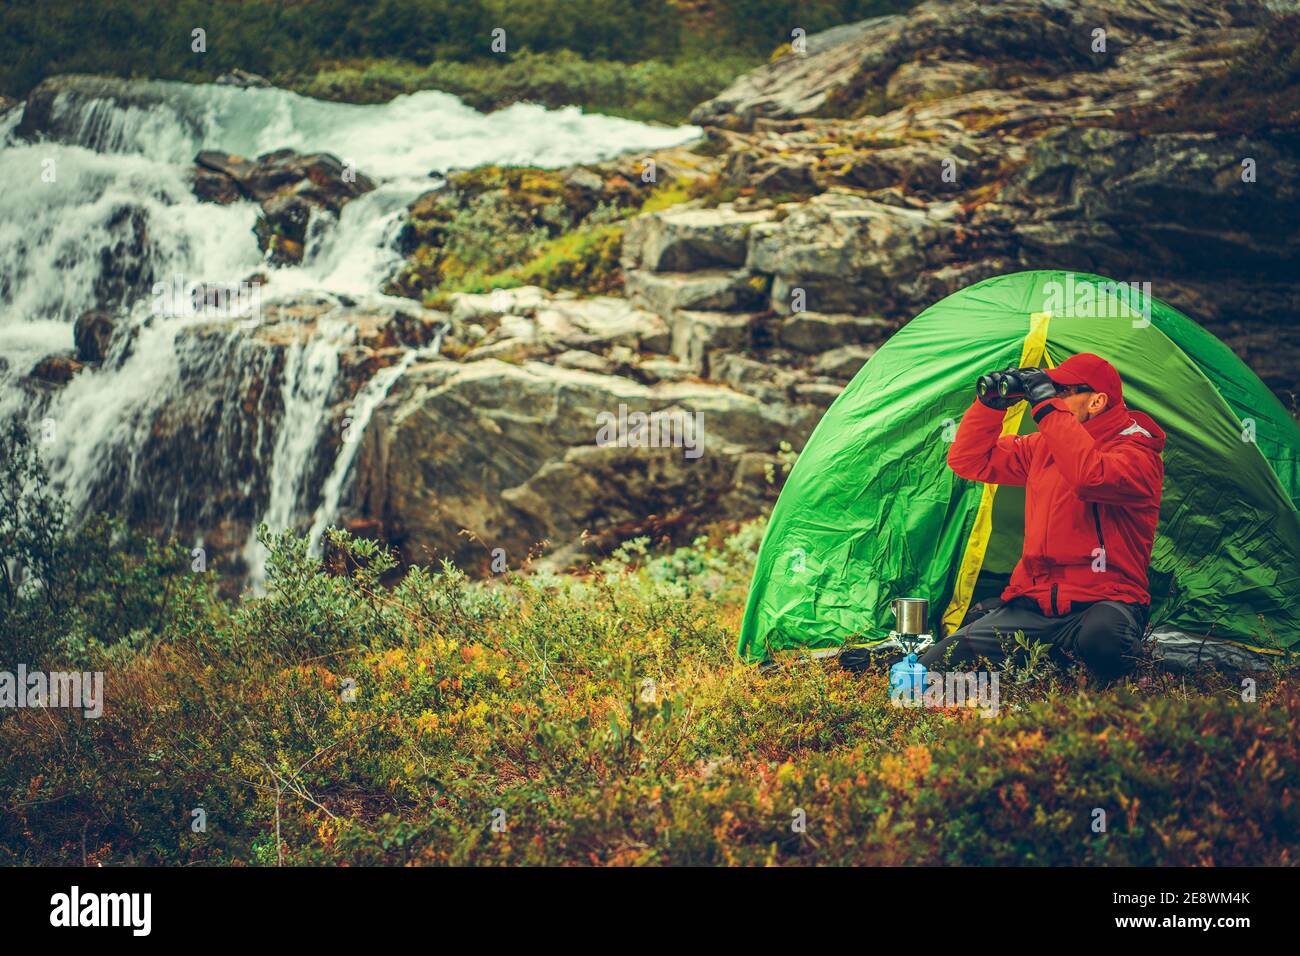 Caucasian Outdoor Men in Front of His Tent Spotting Something Using Binoculars. Scenic Landscape with Waterfall in Background. Wilderness Camping Spot Stock Photo